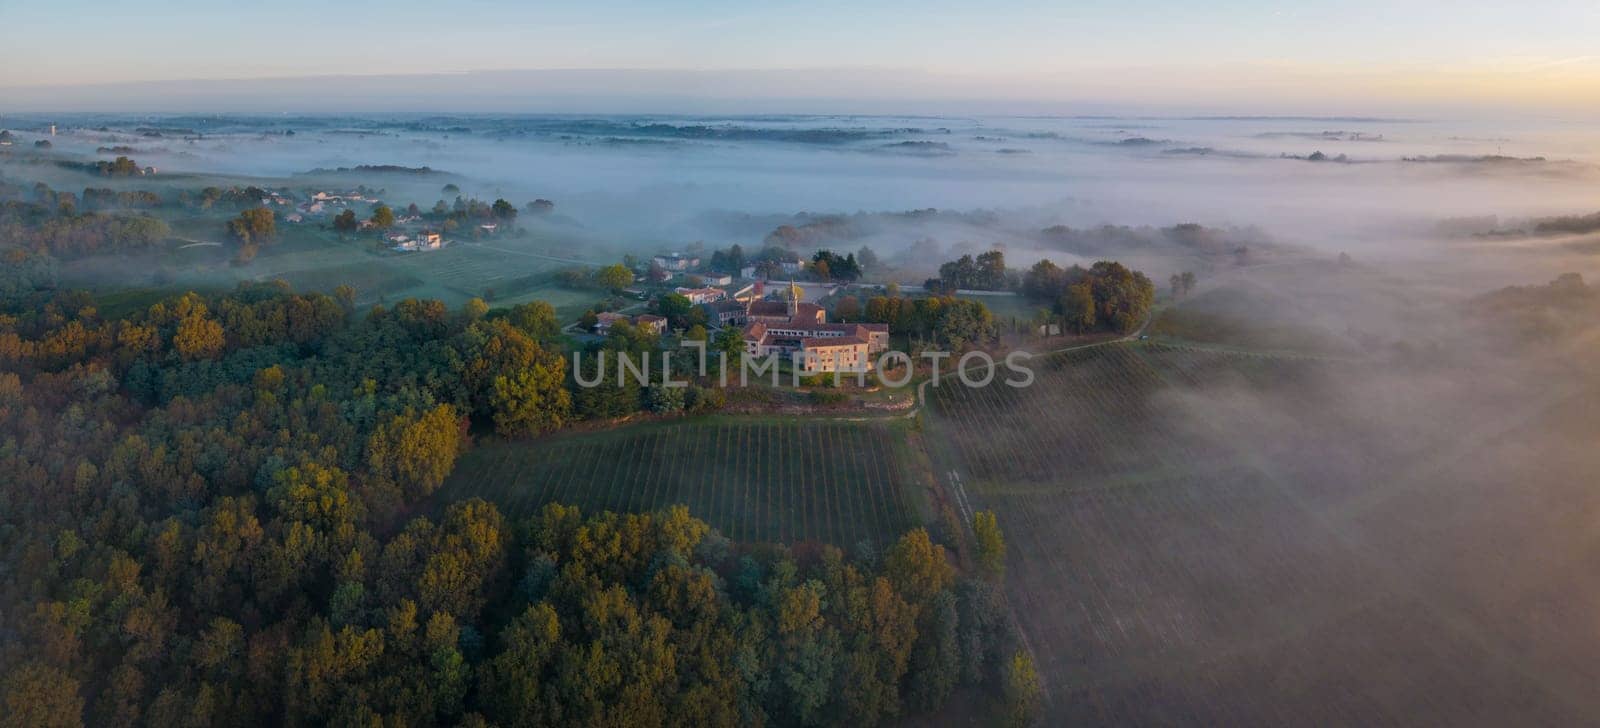 Aerial view of vineyard under fog, Rions, Gironde, France. High quality photo